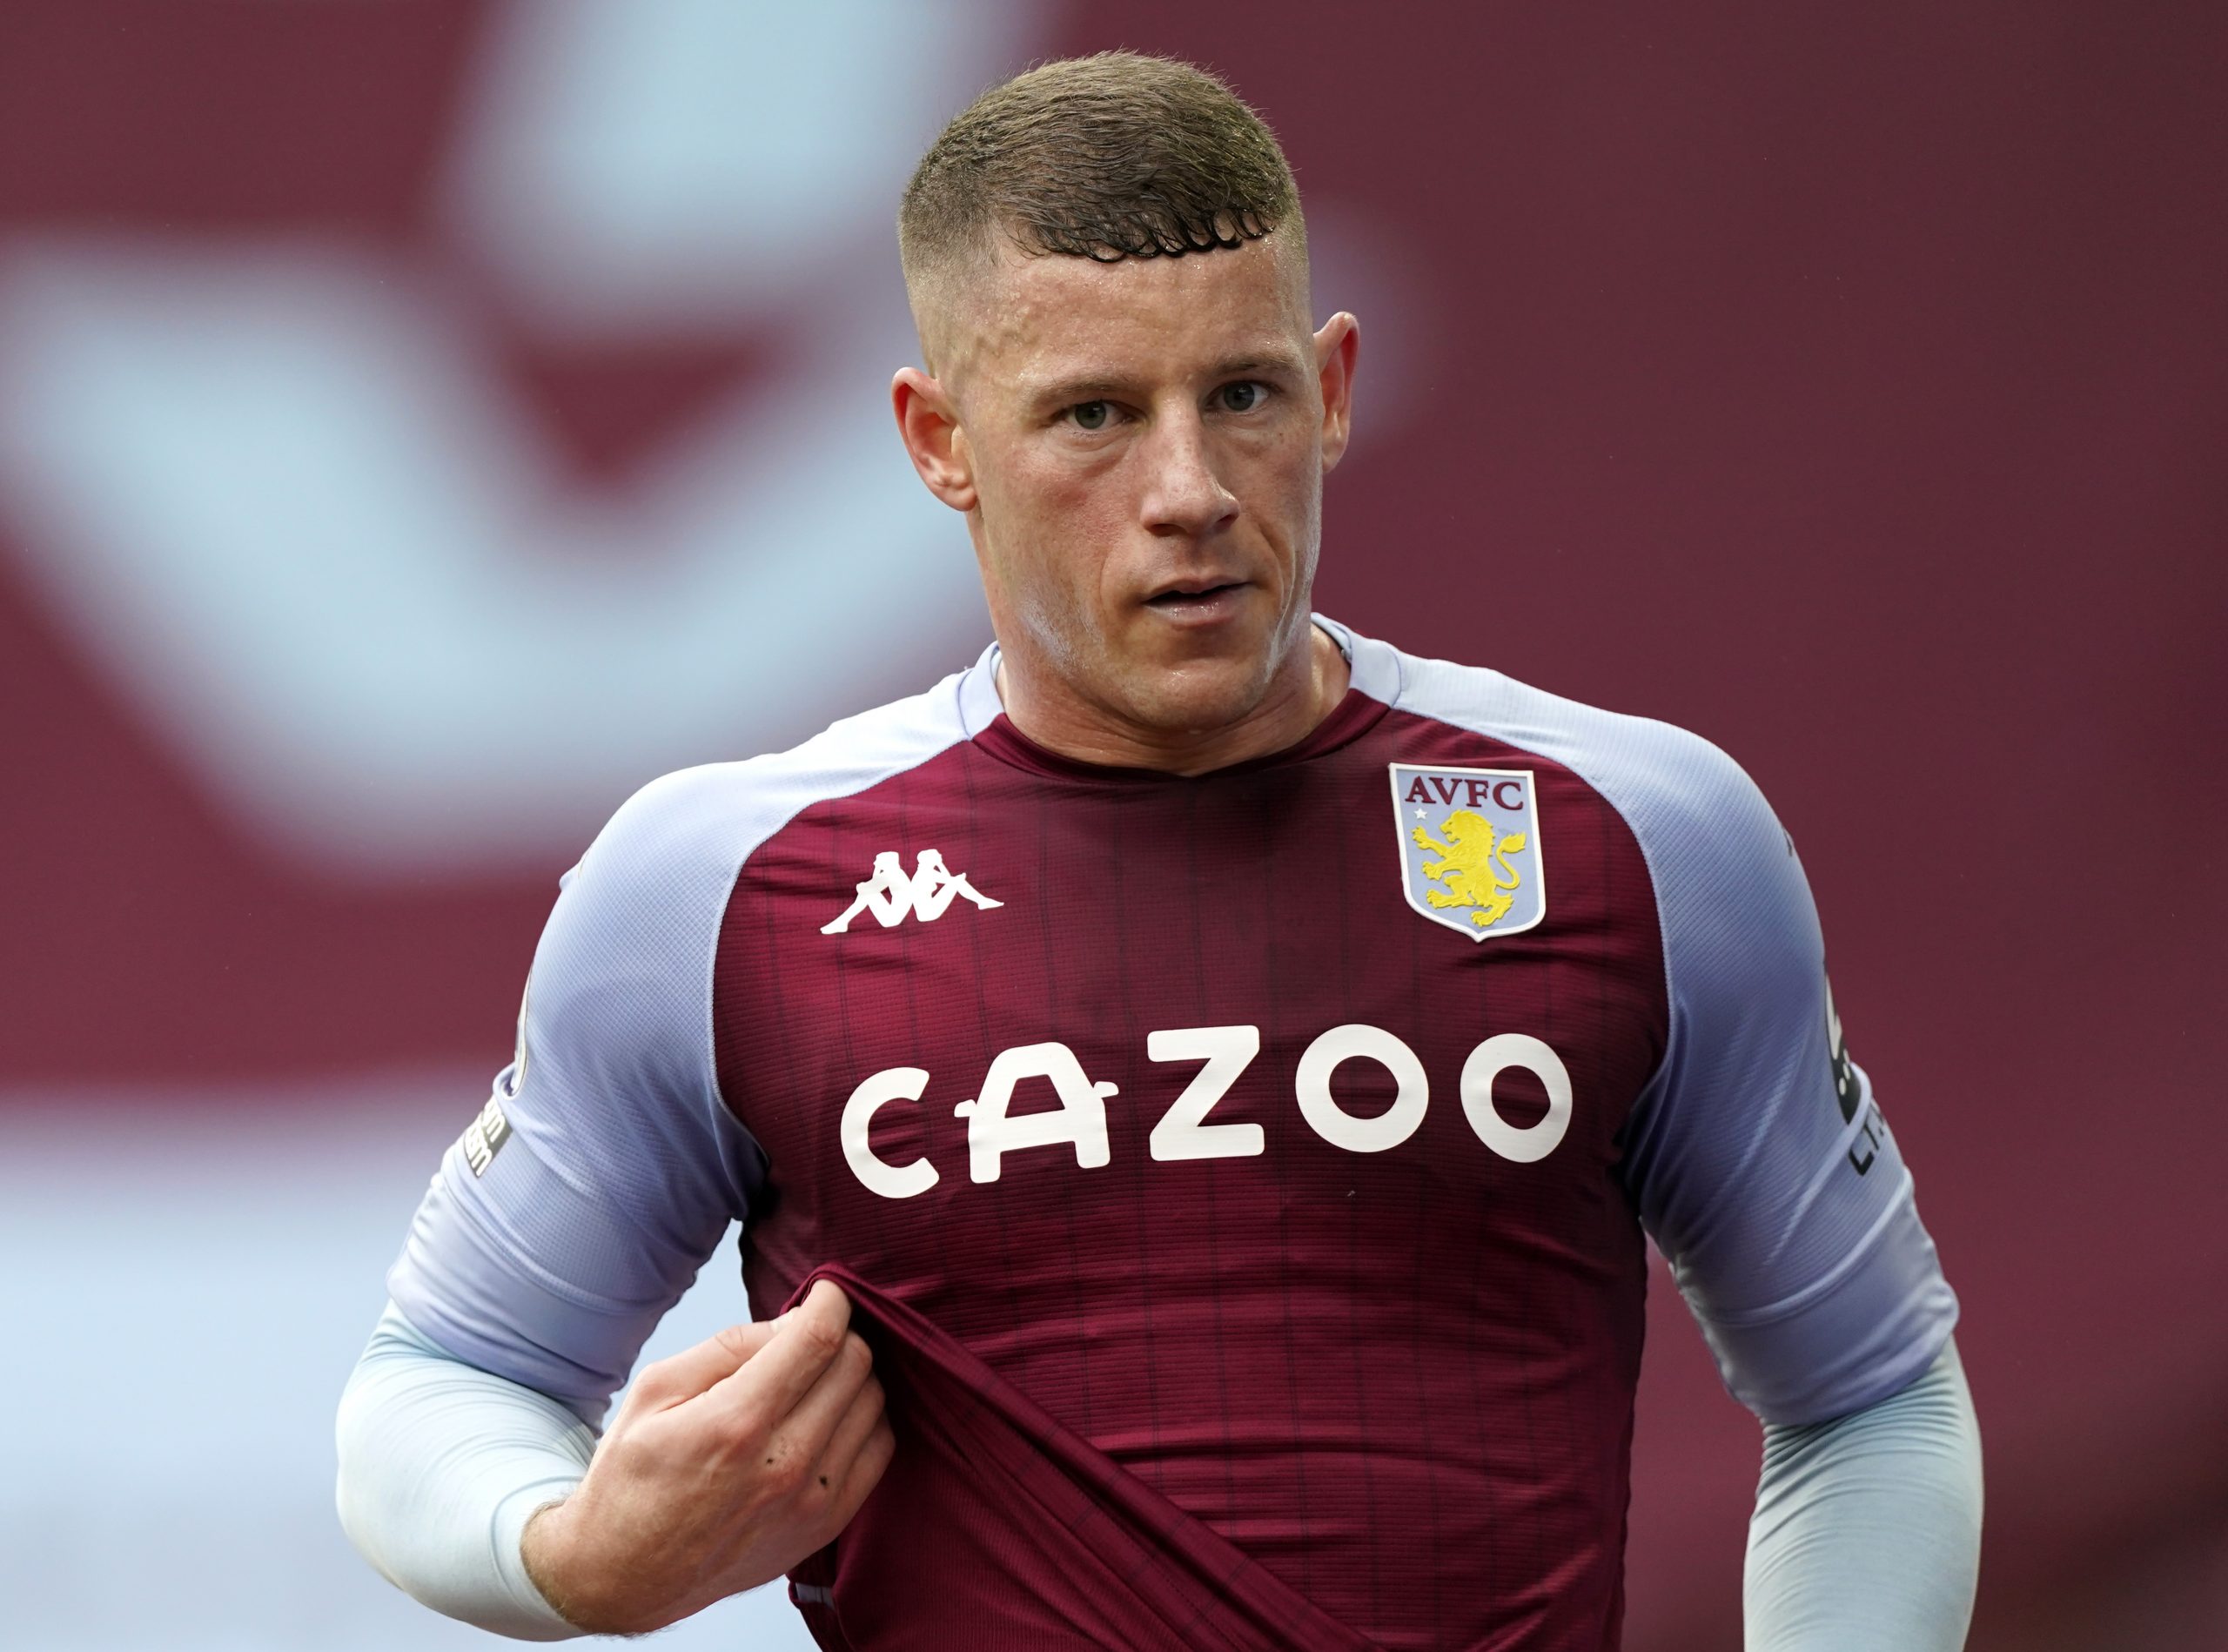 Ross Barkley of Chelsea is among six players on the transfer list.